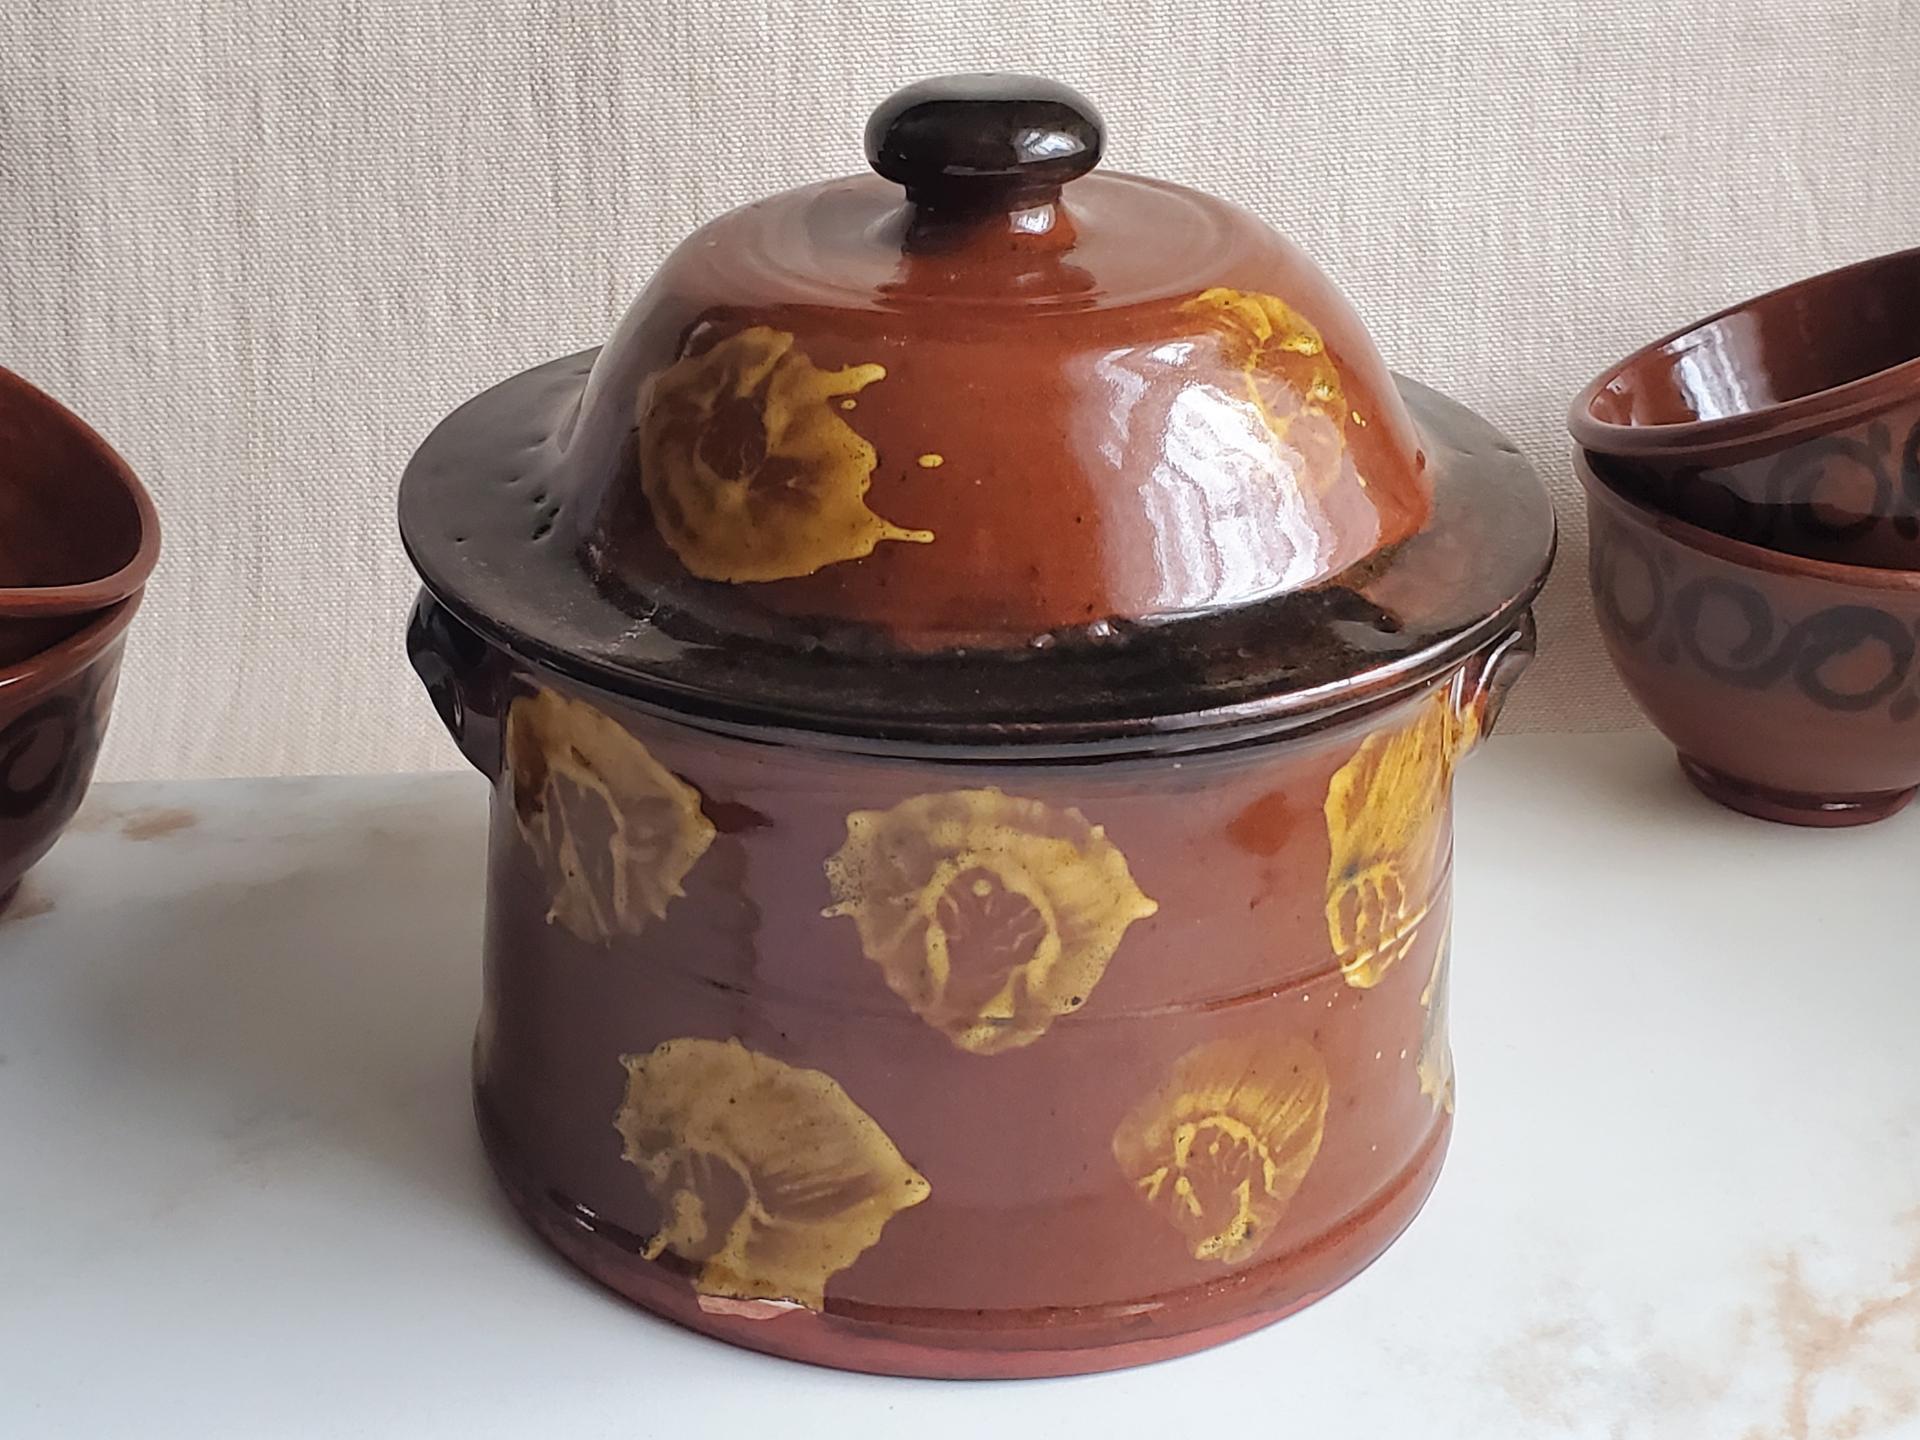 Redware Covered Serving Dish